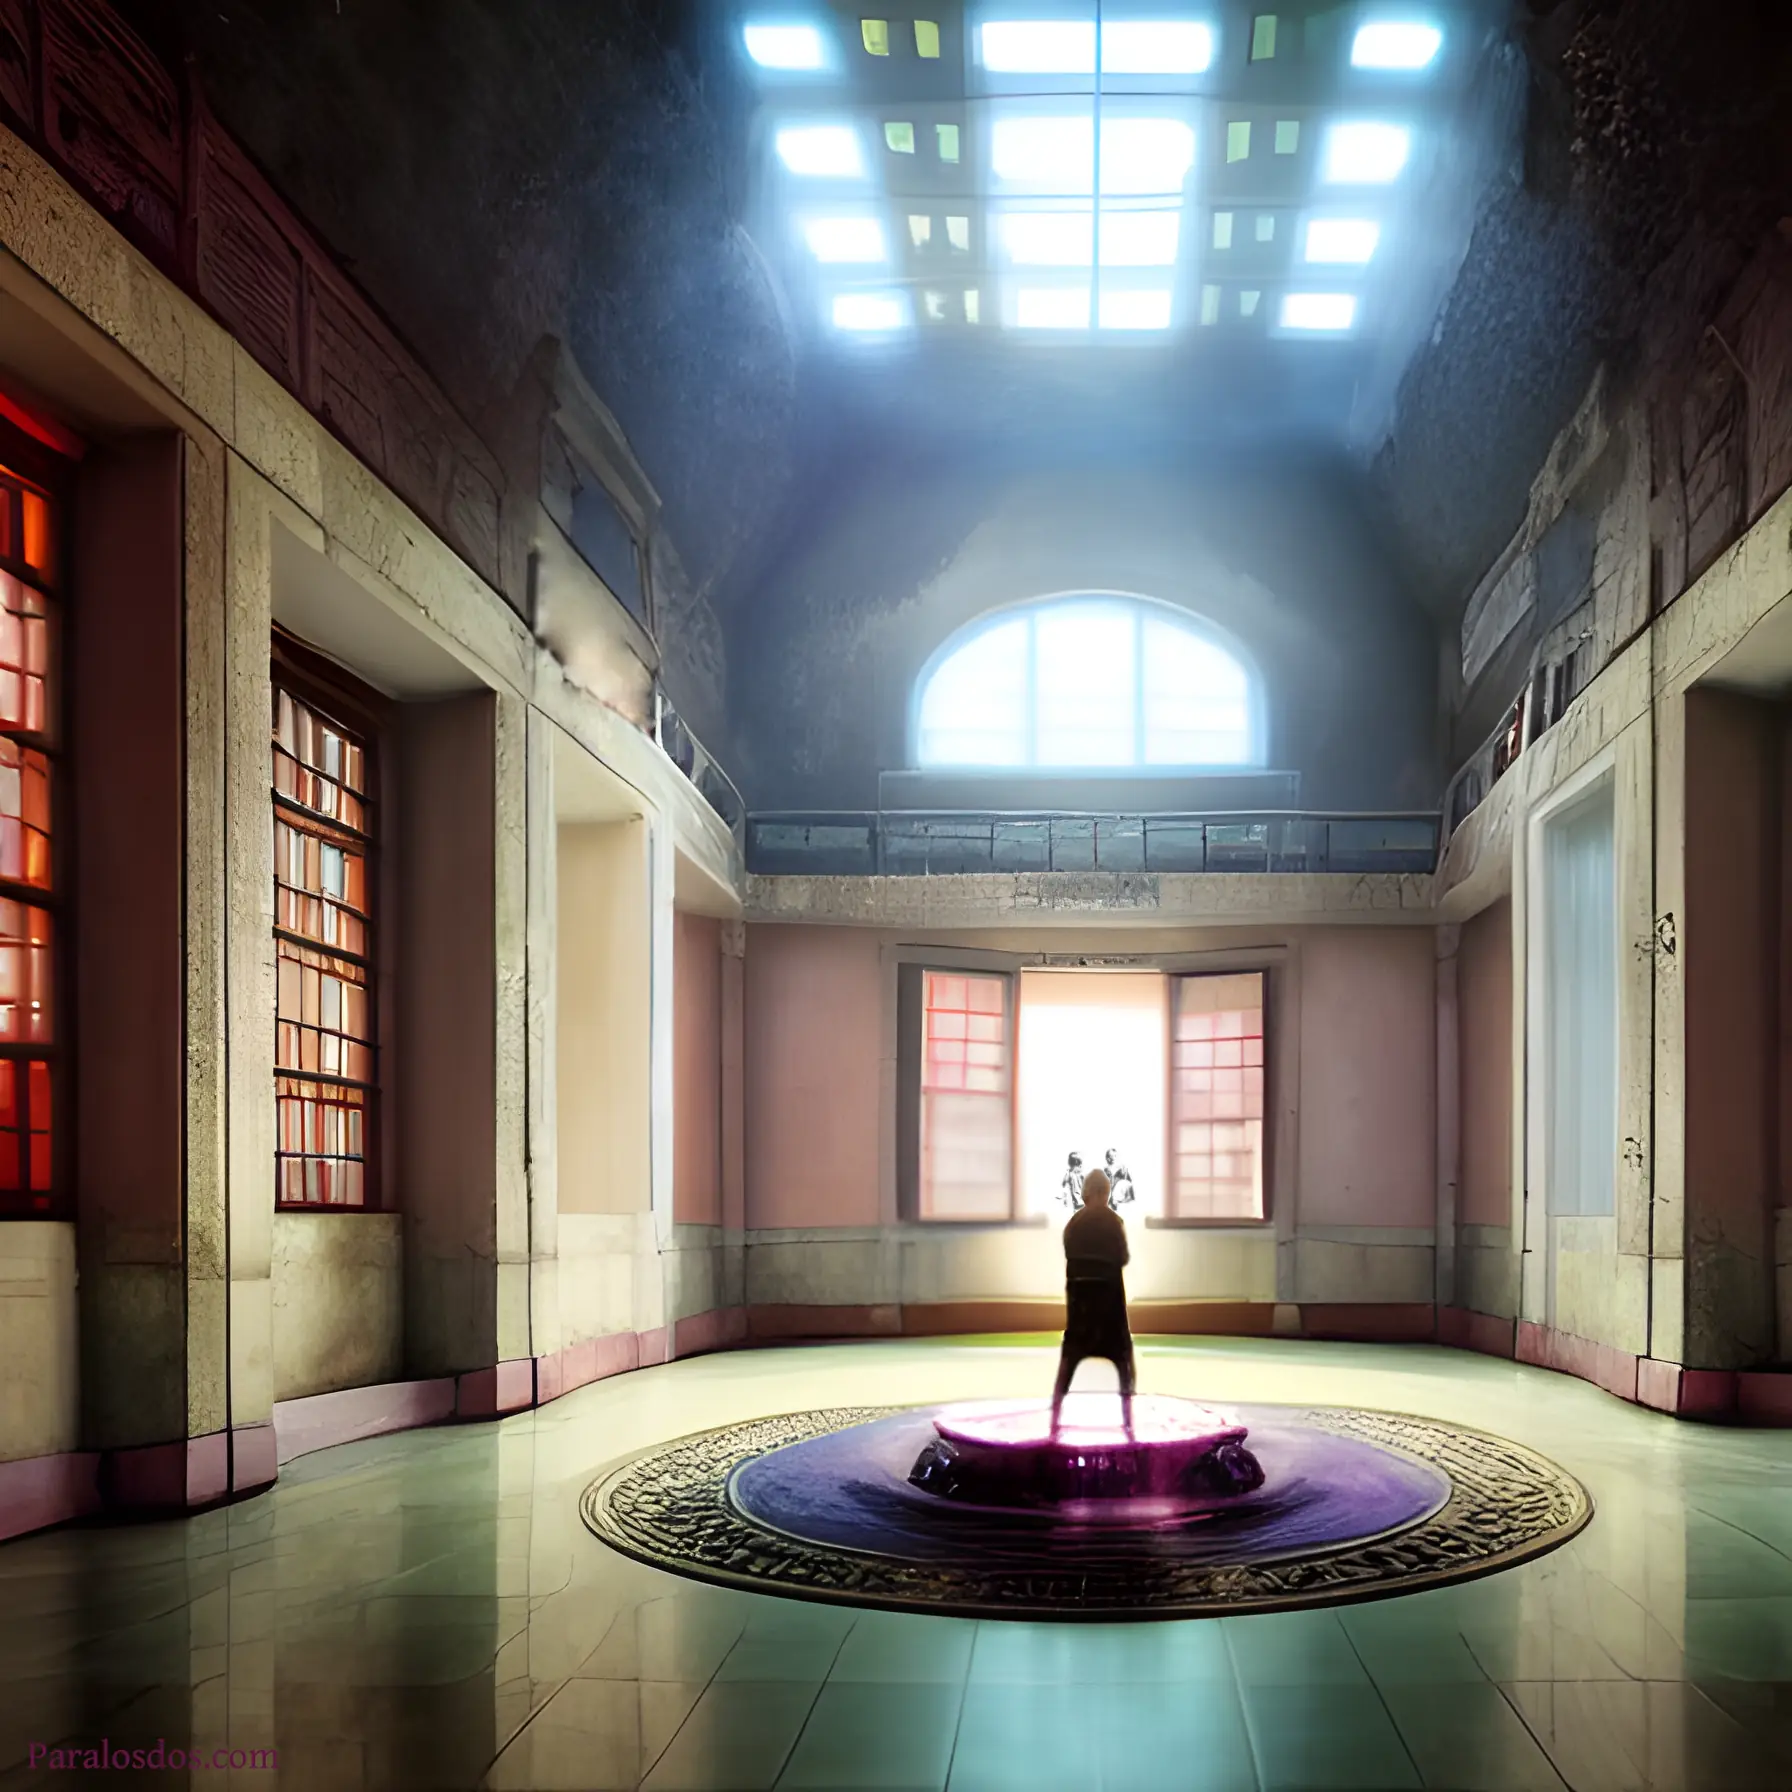 An artistic rendering of a figure standing on a raised circle in the middle of a large, bare room. The figure is facing a large and brightly sunlit open window at the end of the room.